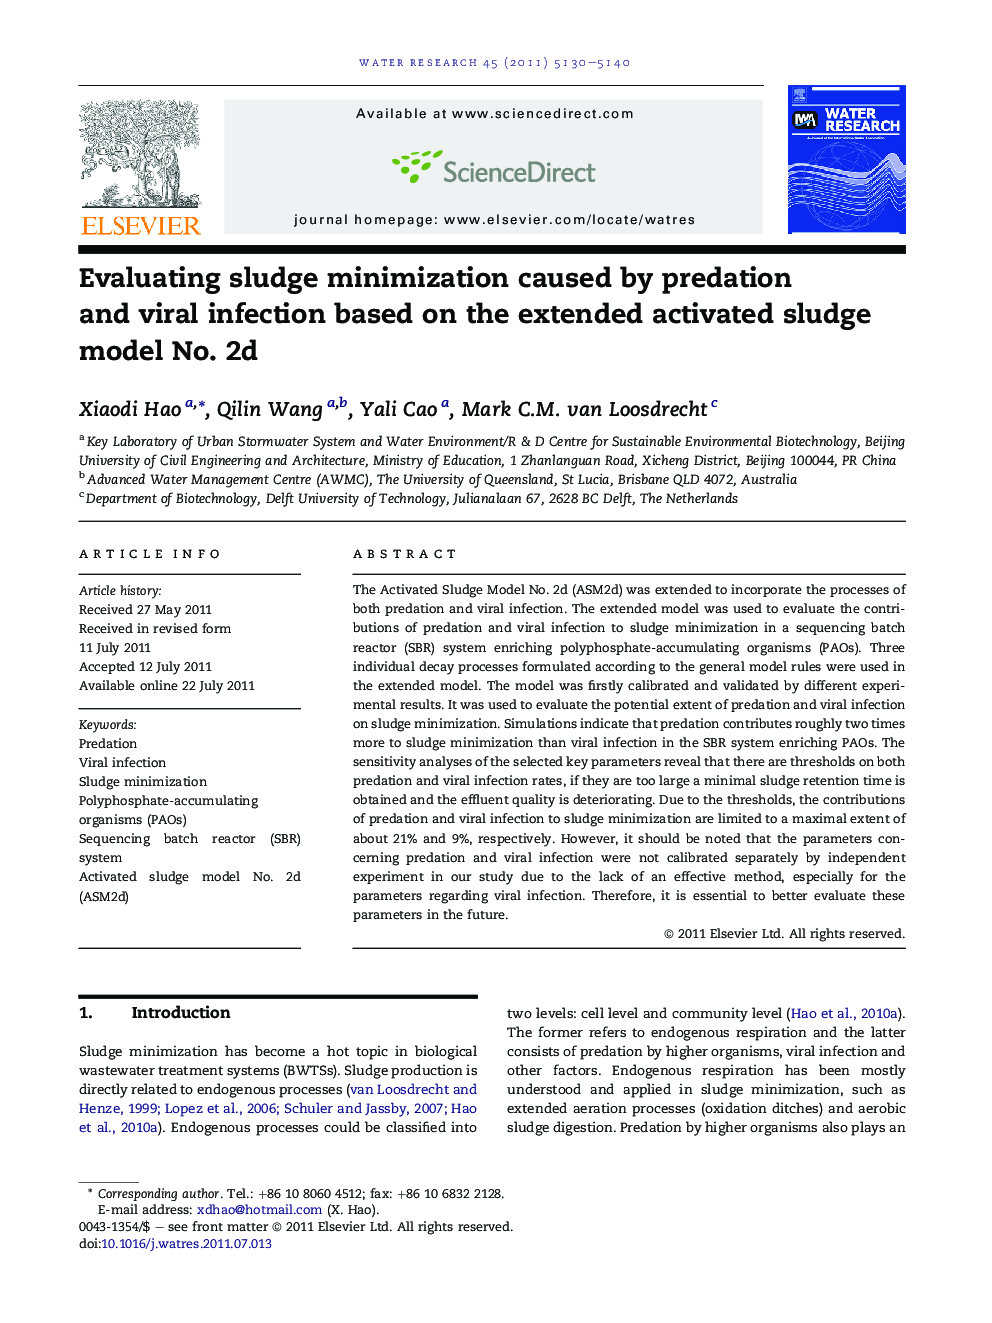 Evaluating sludge minimization caused by predation and viral infection based on the extended activated sludge model No. 2d